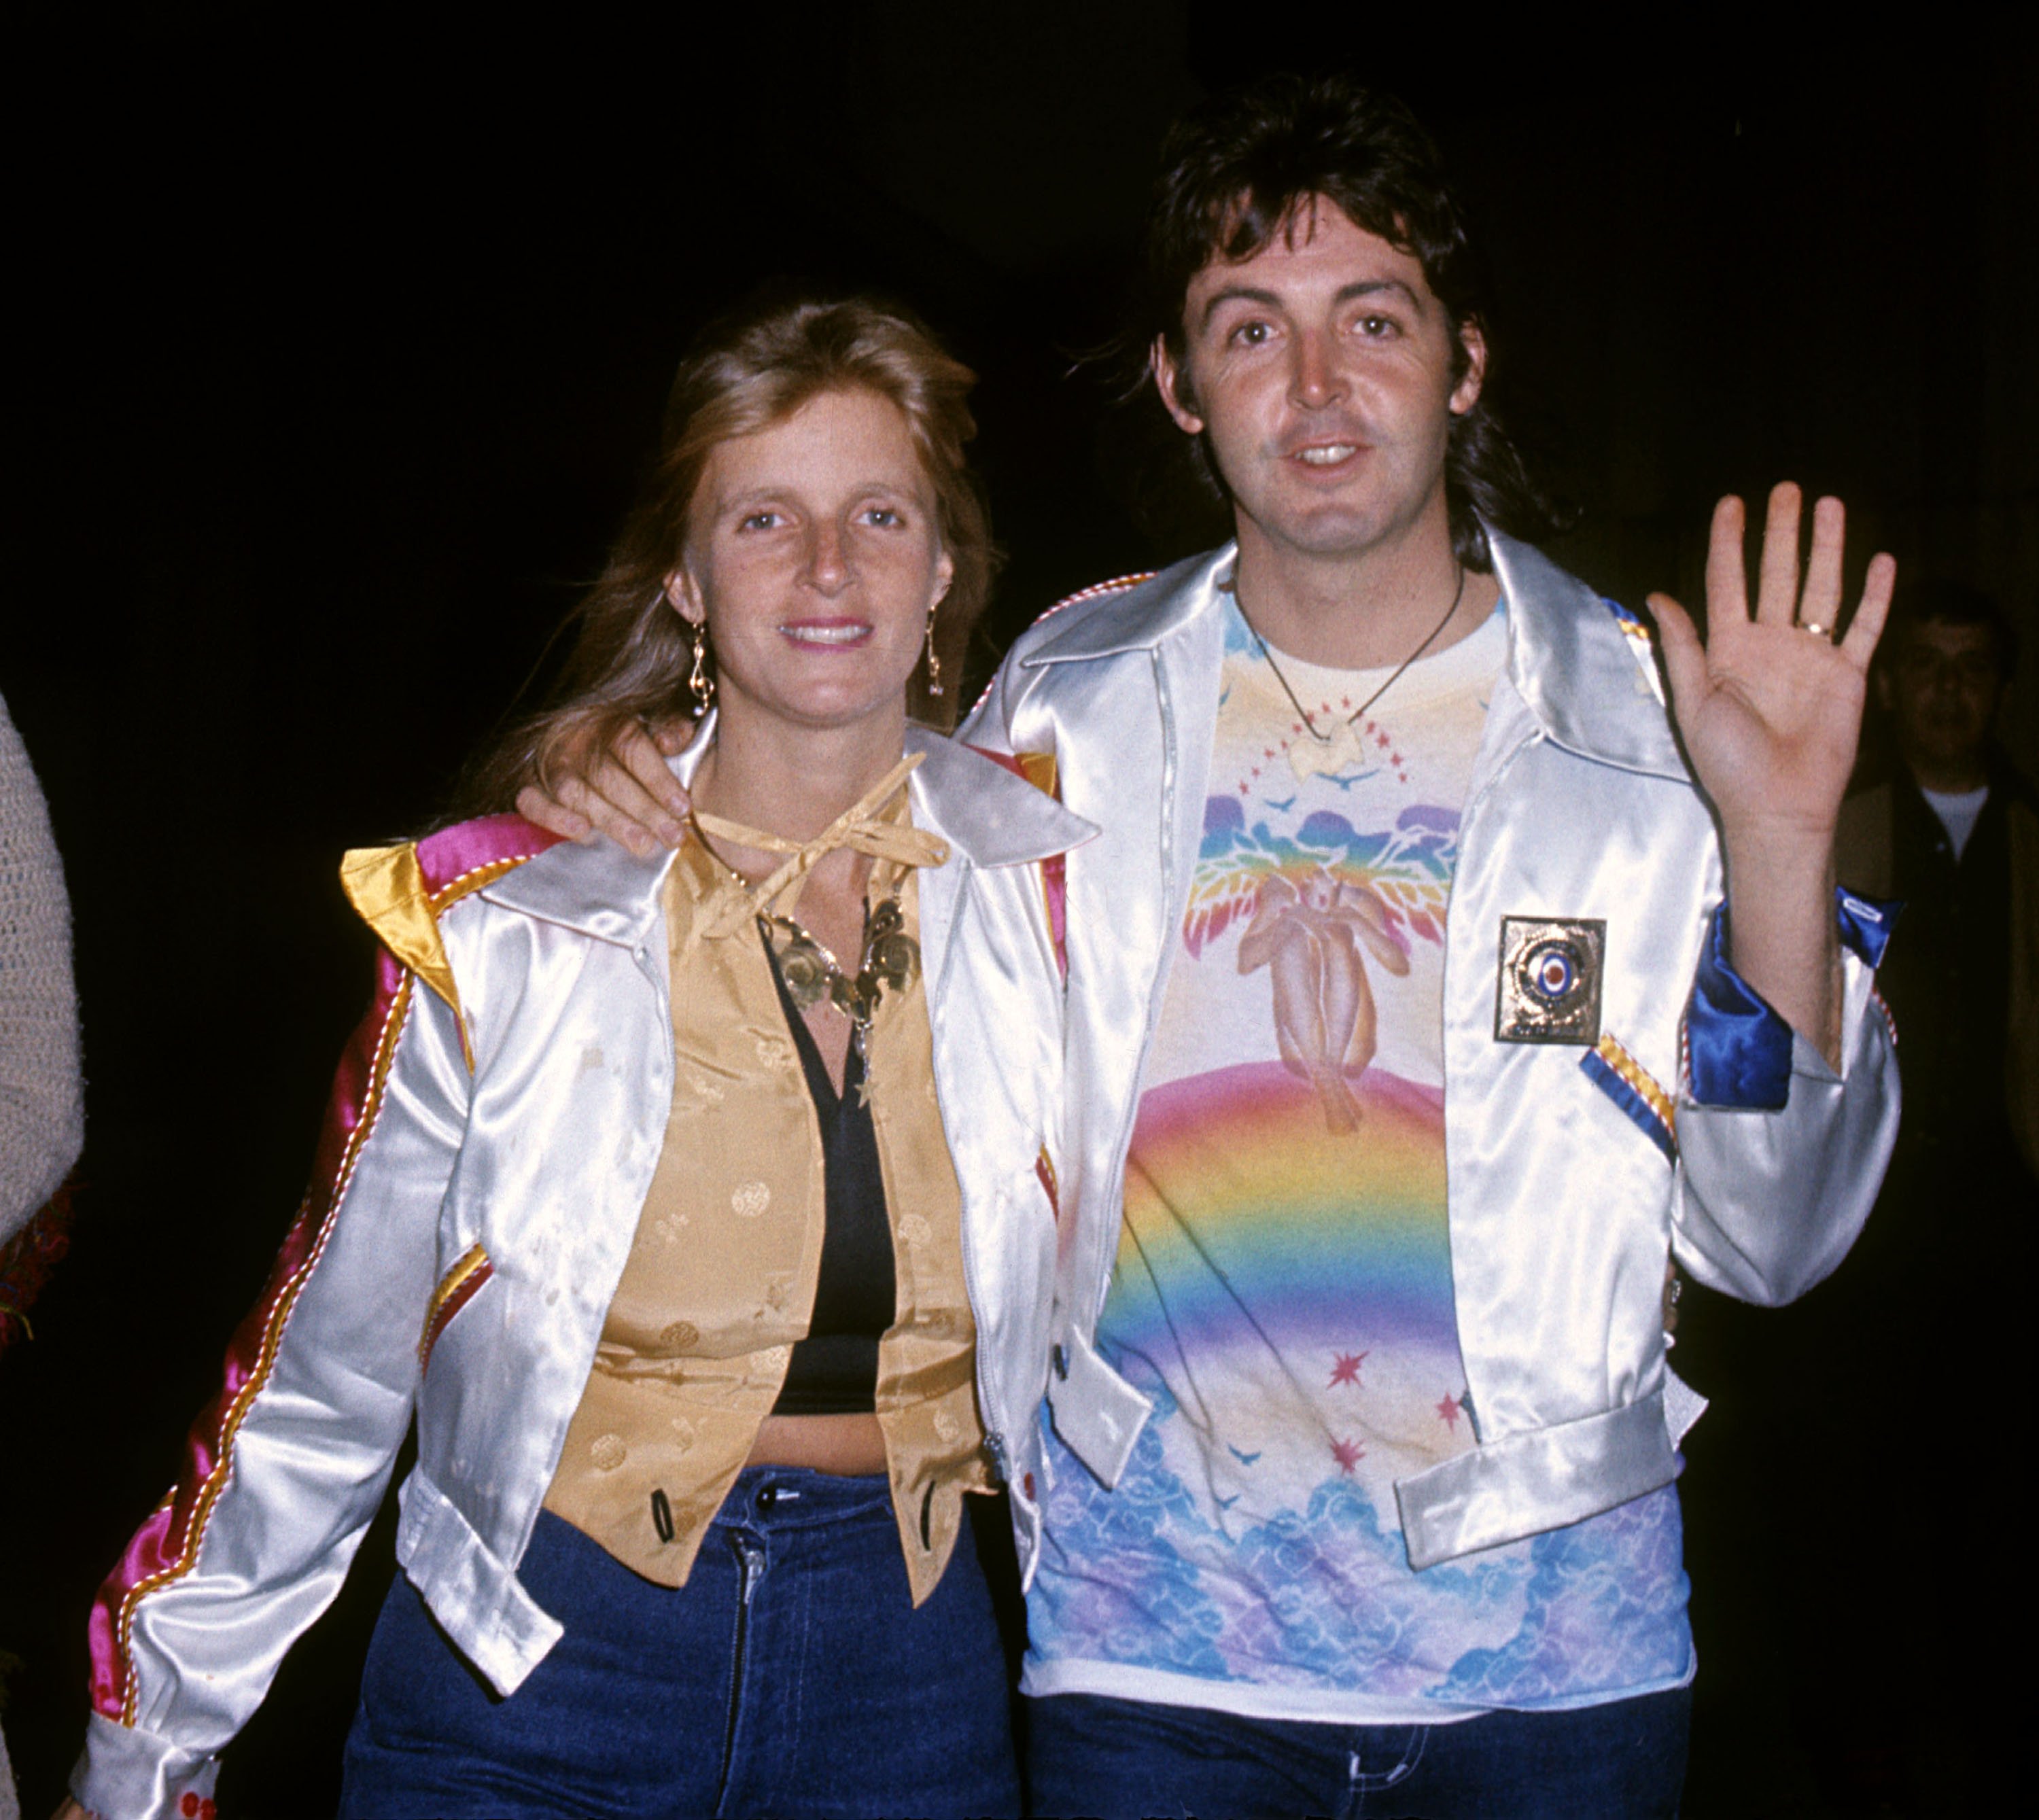 Linda and Paul McCartney at Madison Square Garden for the Wings concert on September 15, 1976 | Source: Getty Images